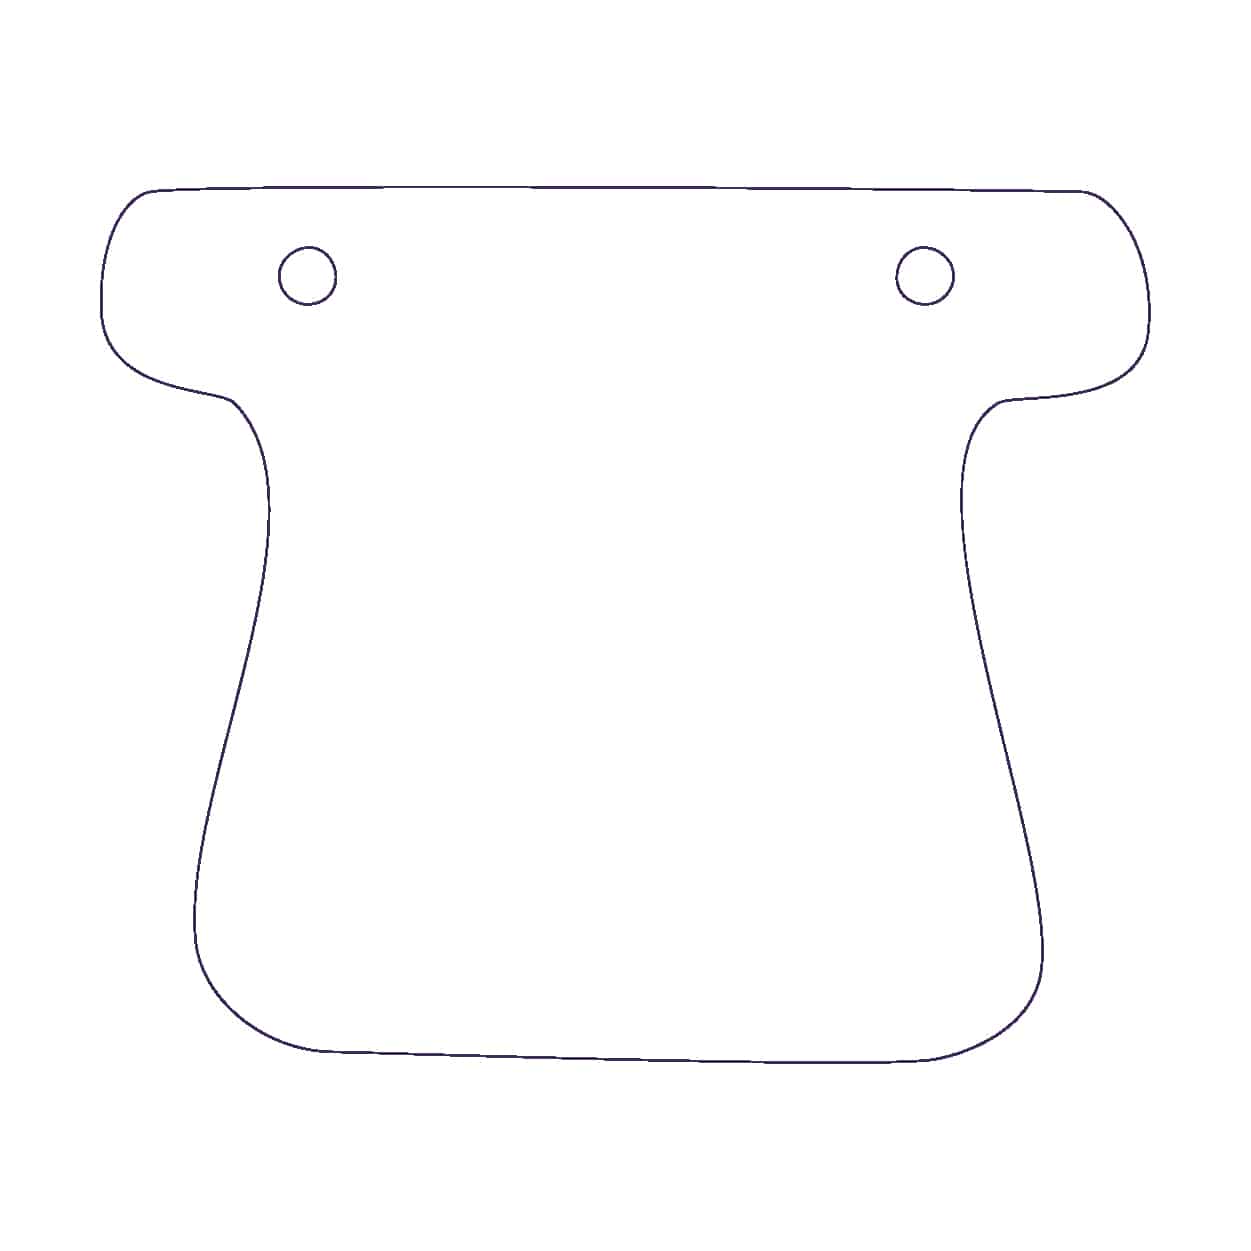 Purple outline of a press bag on a white background